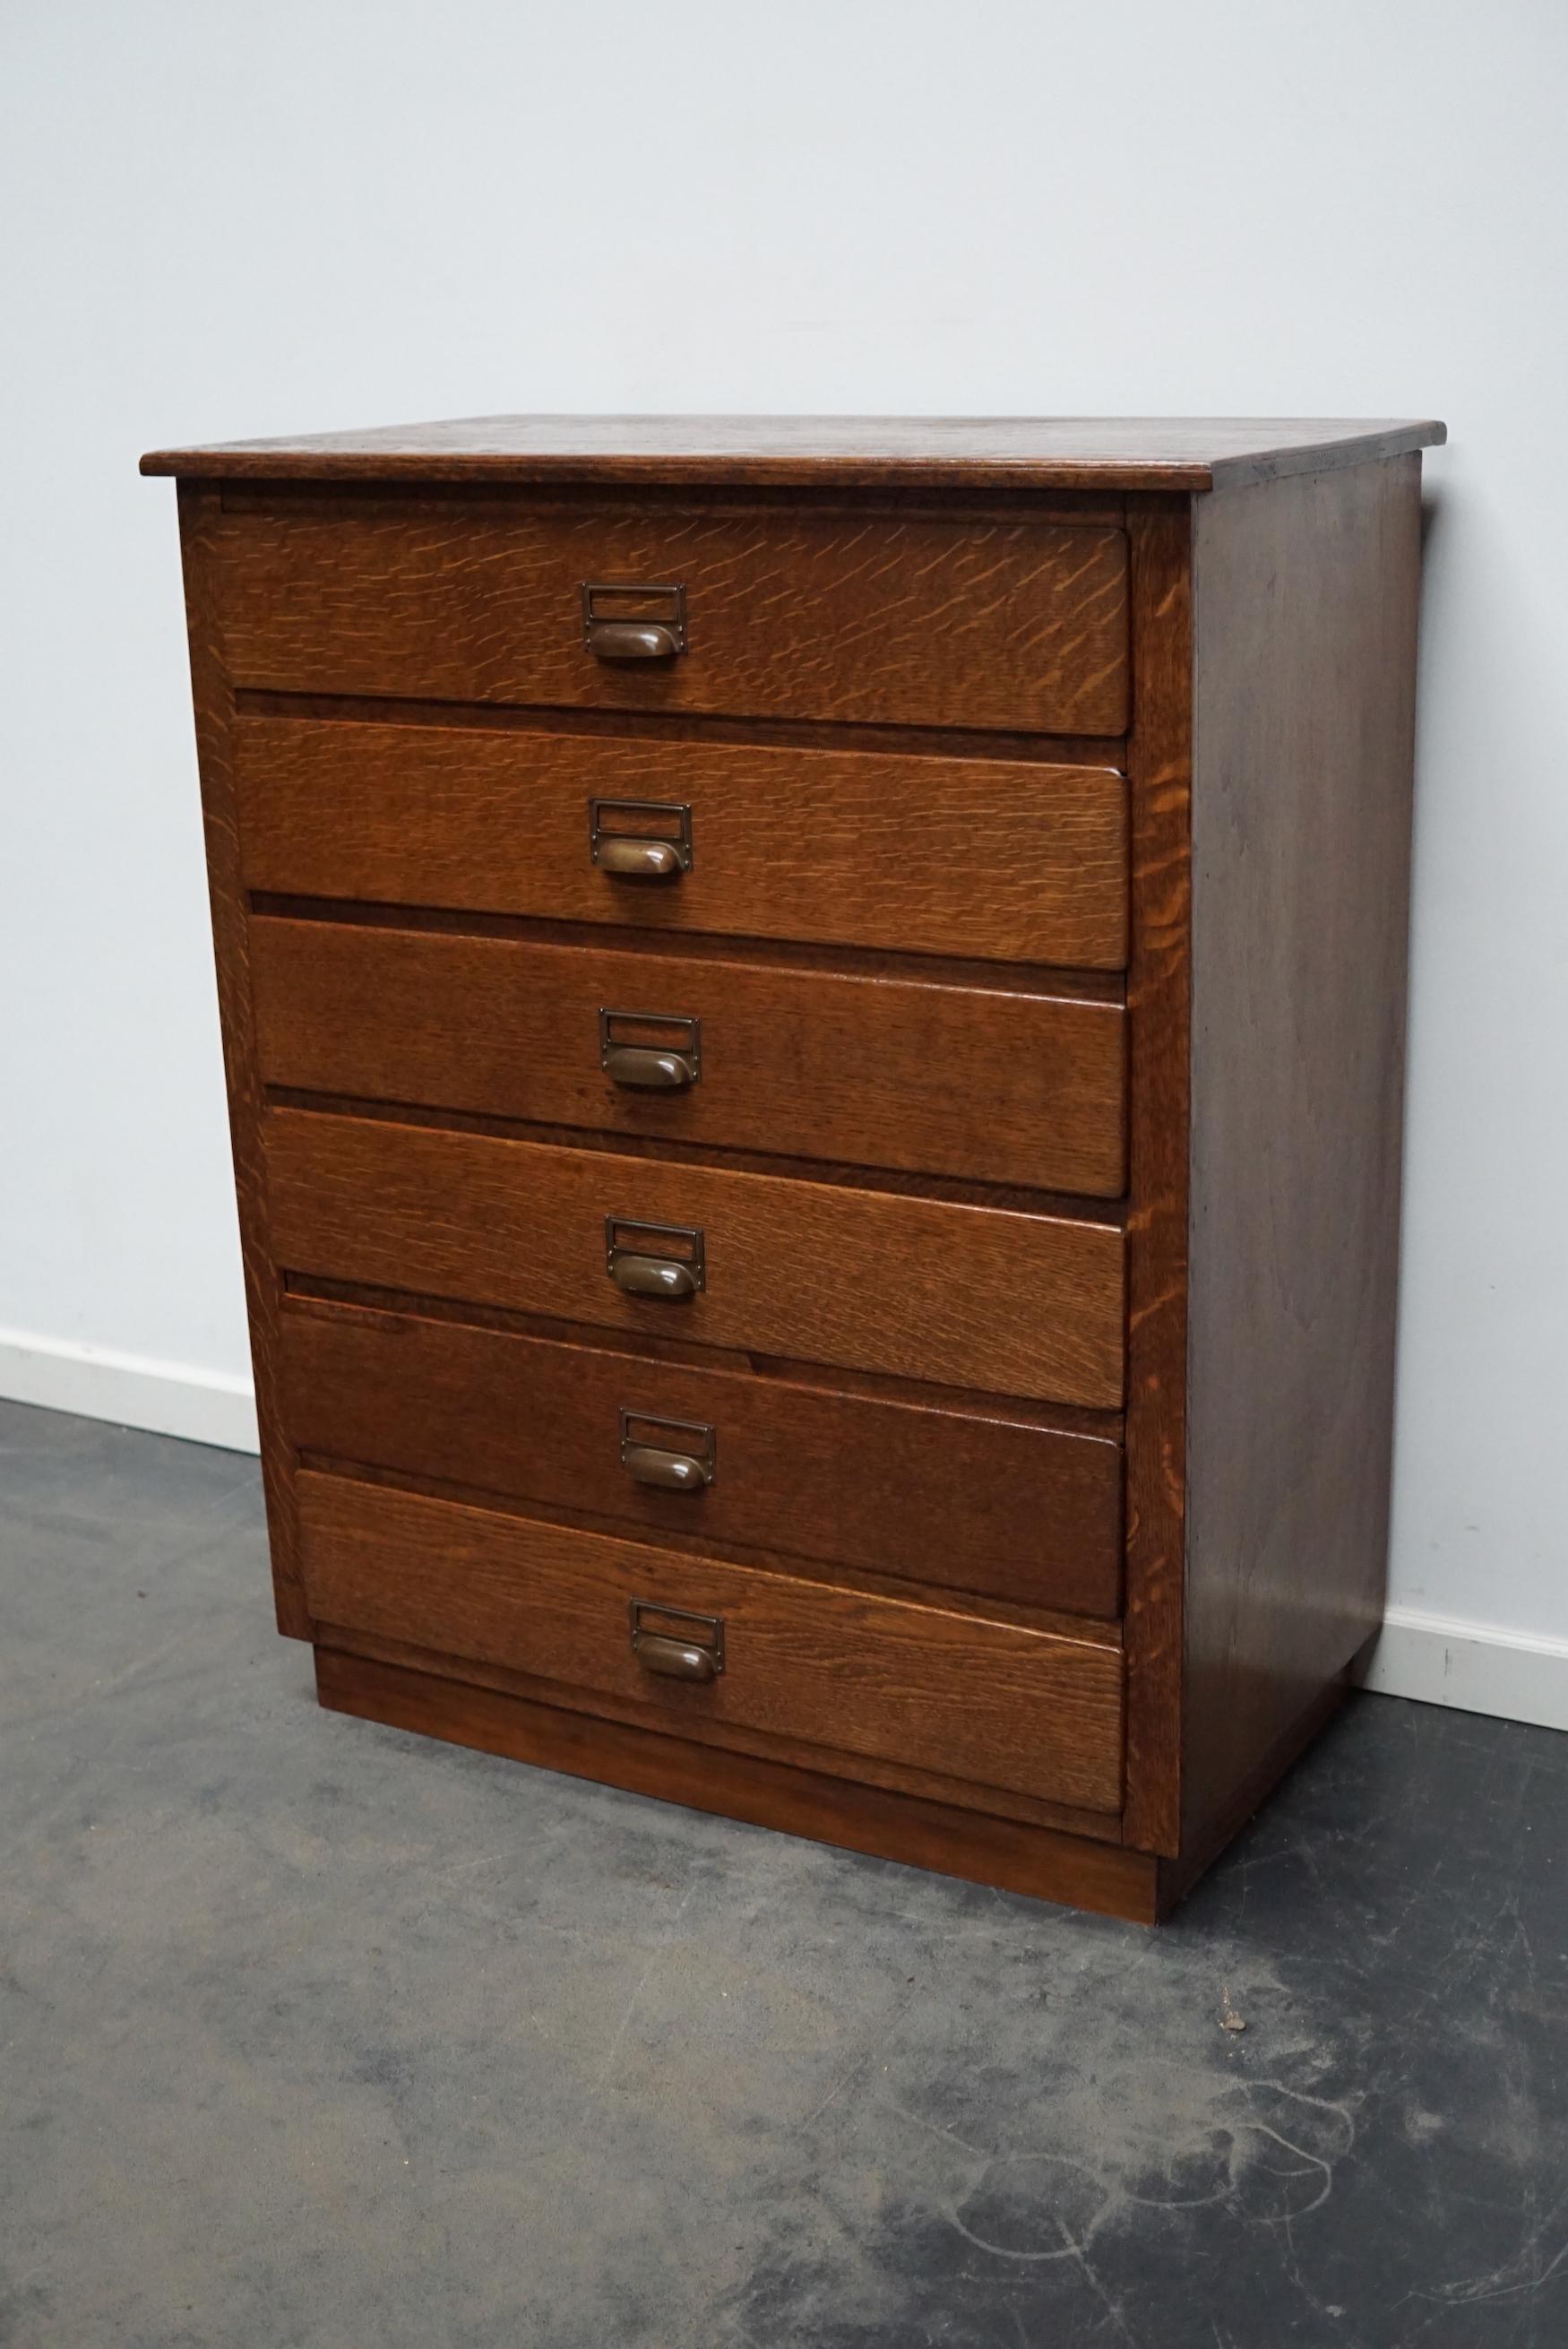 This apothecary cabinet was designed and made from oak circa 1930 in the Netherlands. It features 6 decent sized drawers with brass hardware. The inside of the drawers measure: DWH 36 x 32 x 14 cm.